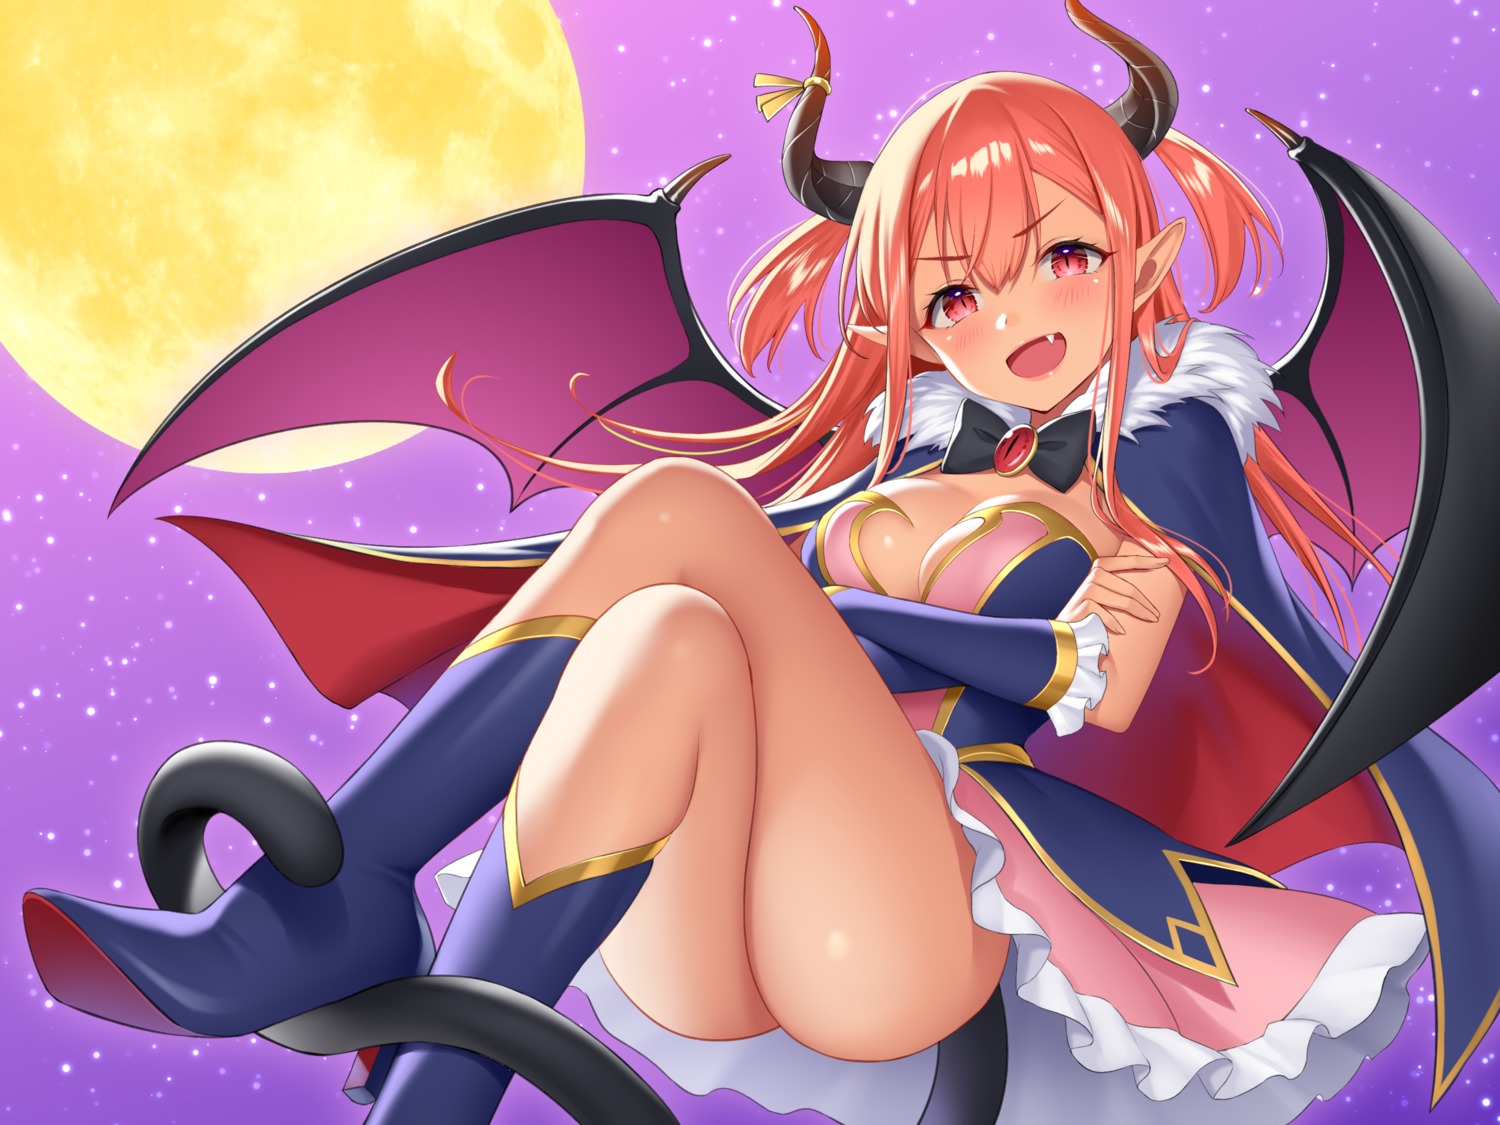 breast_hold cleavage dress heels horns pointy_ears re:shimashima skirt_lift tail wings